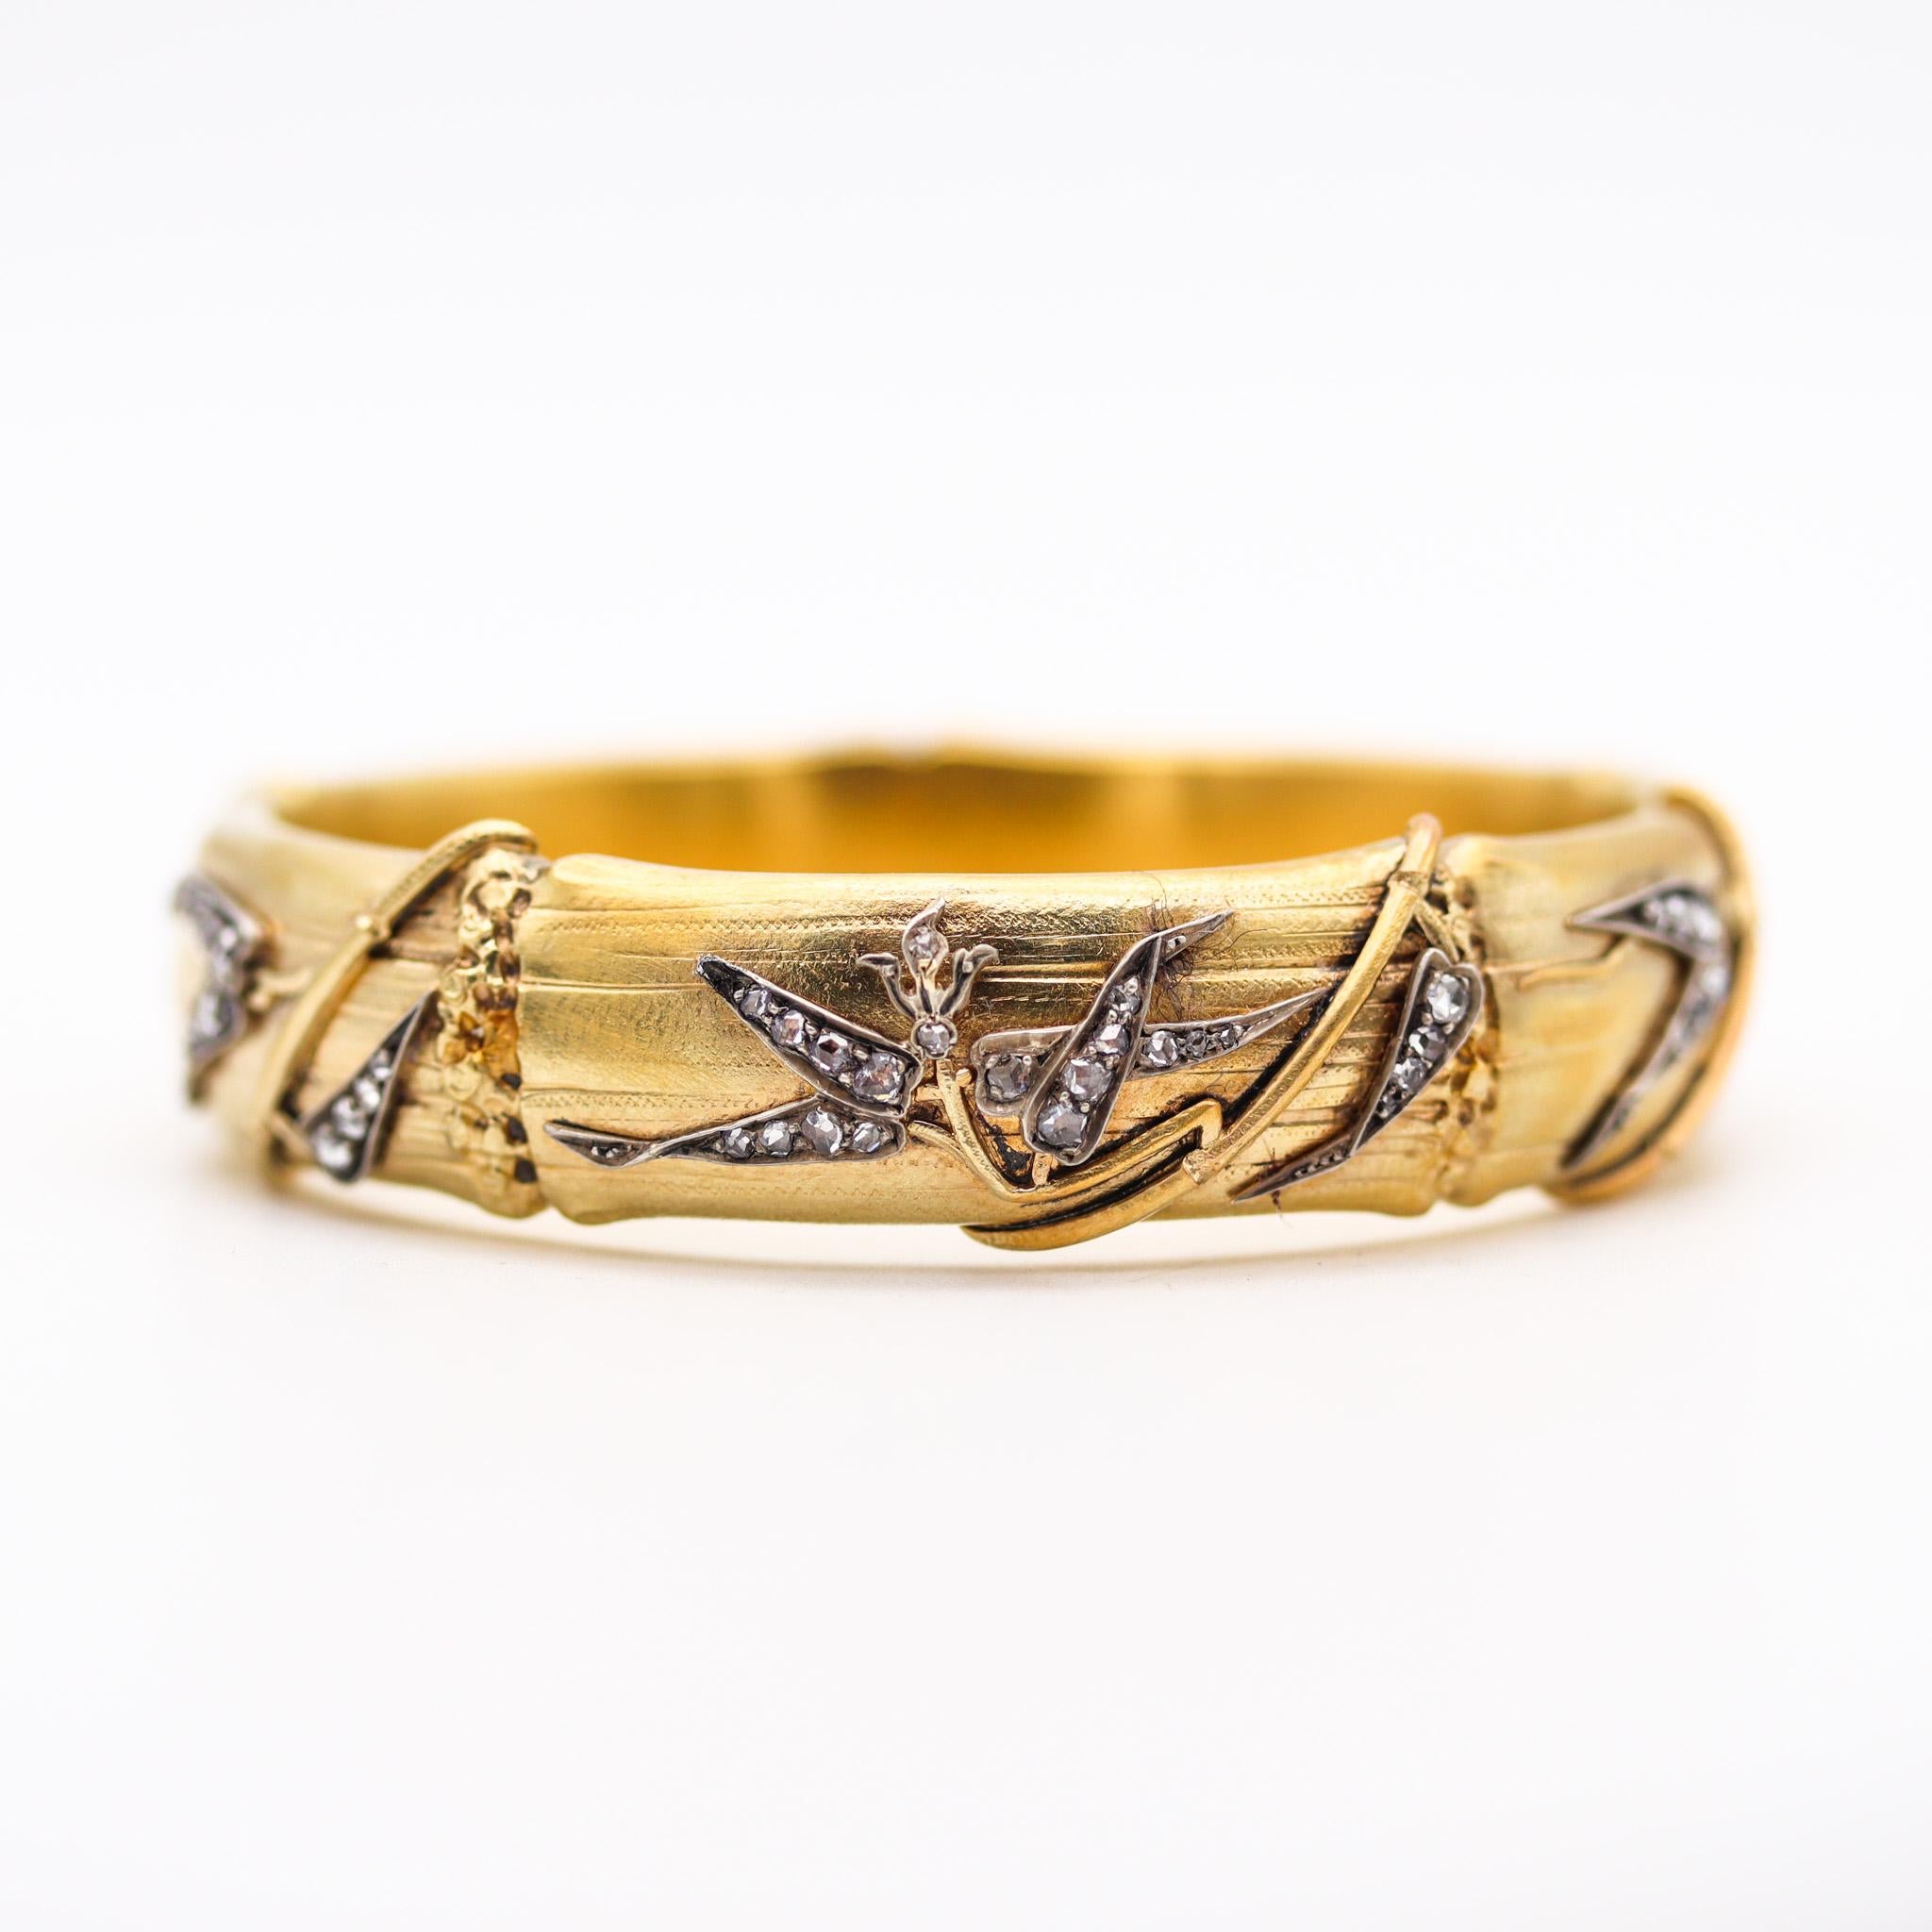 Art Nouveau French 1880 Bamboo Pattern Bracelet In 18Kt Yellow Gold With Rose Cut Diamonds For Sale